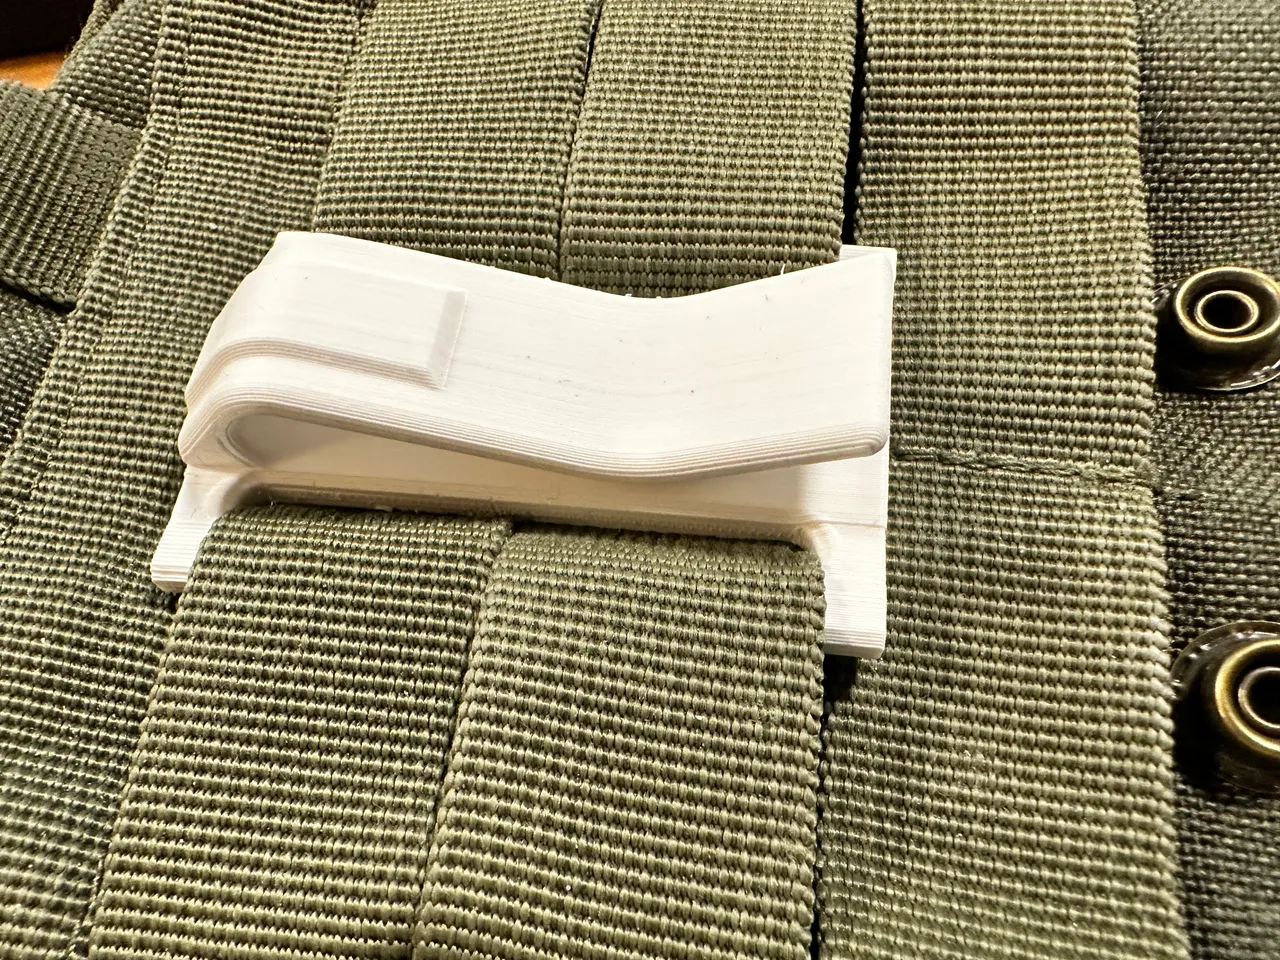 Mussy Molle clips to Vedder holster by Seth Wahle, Download free STL model